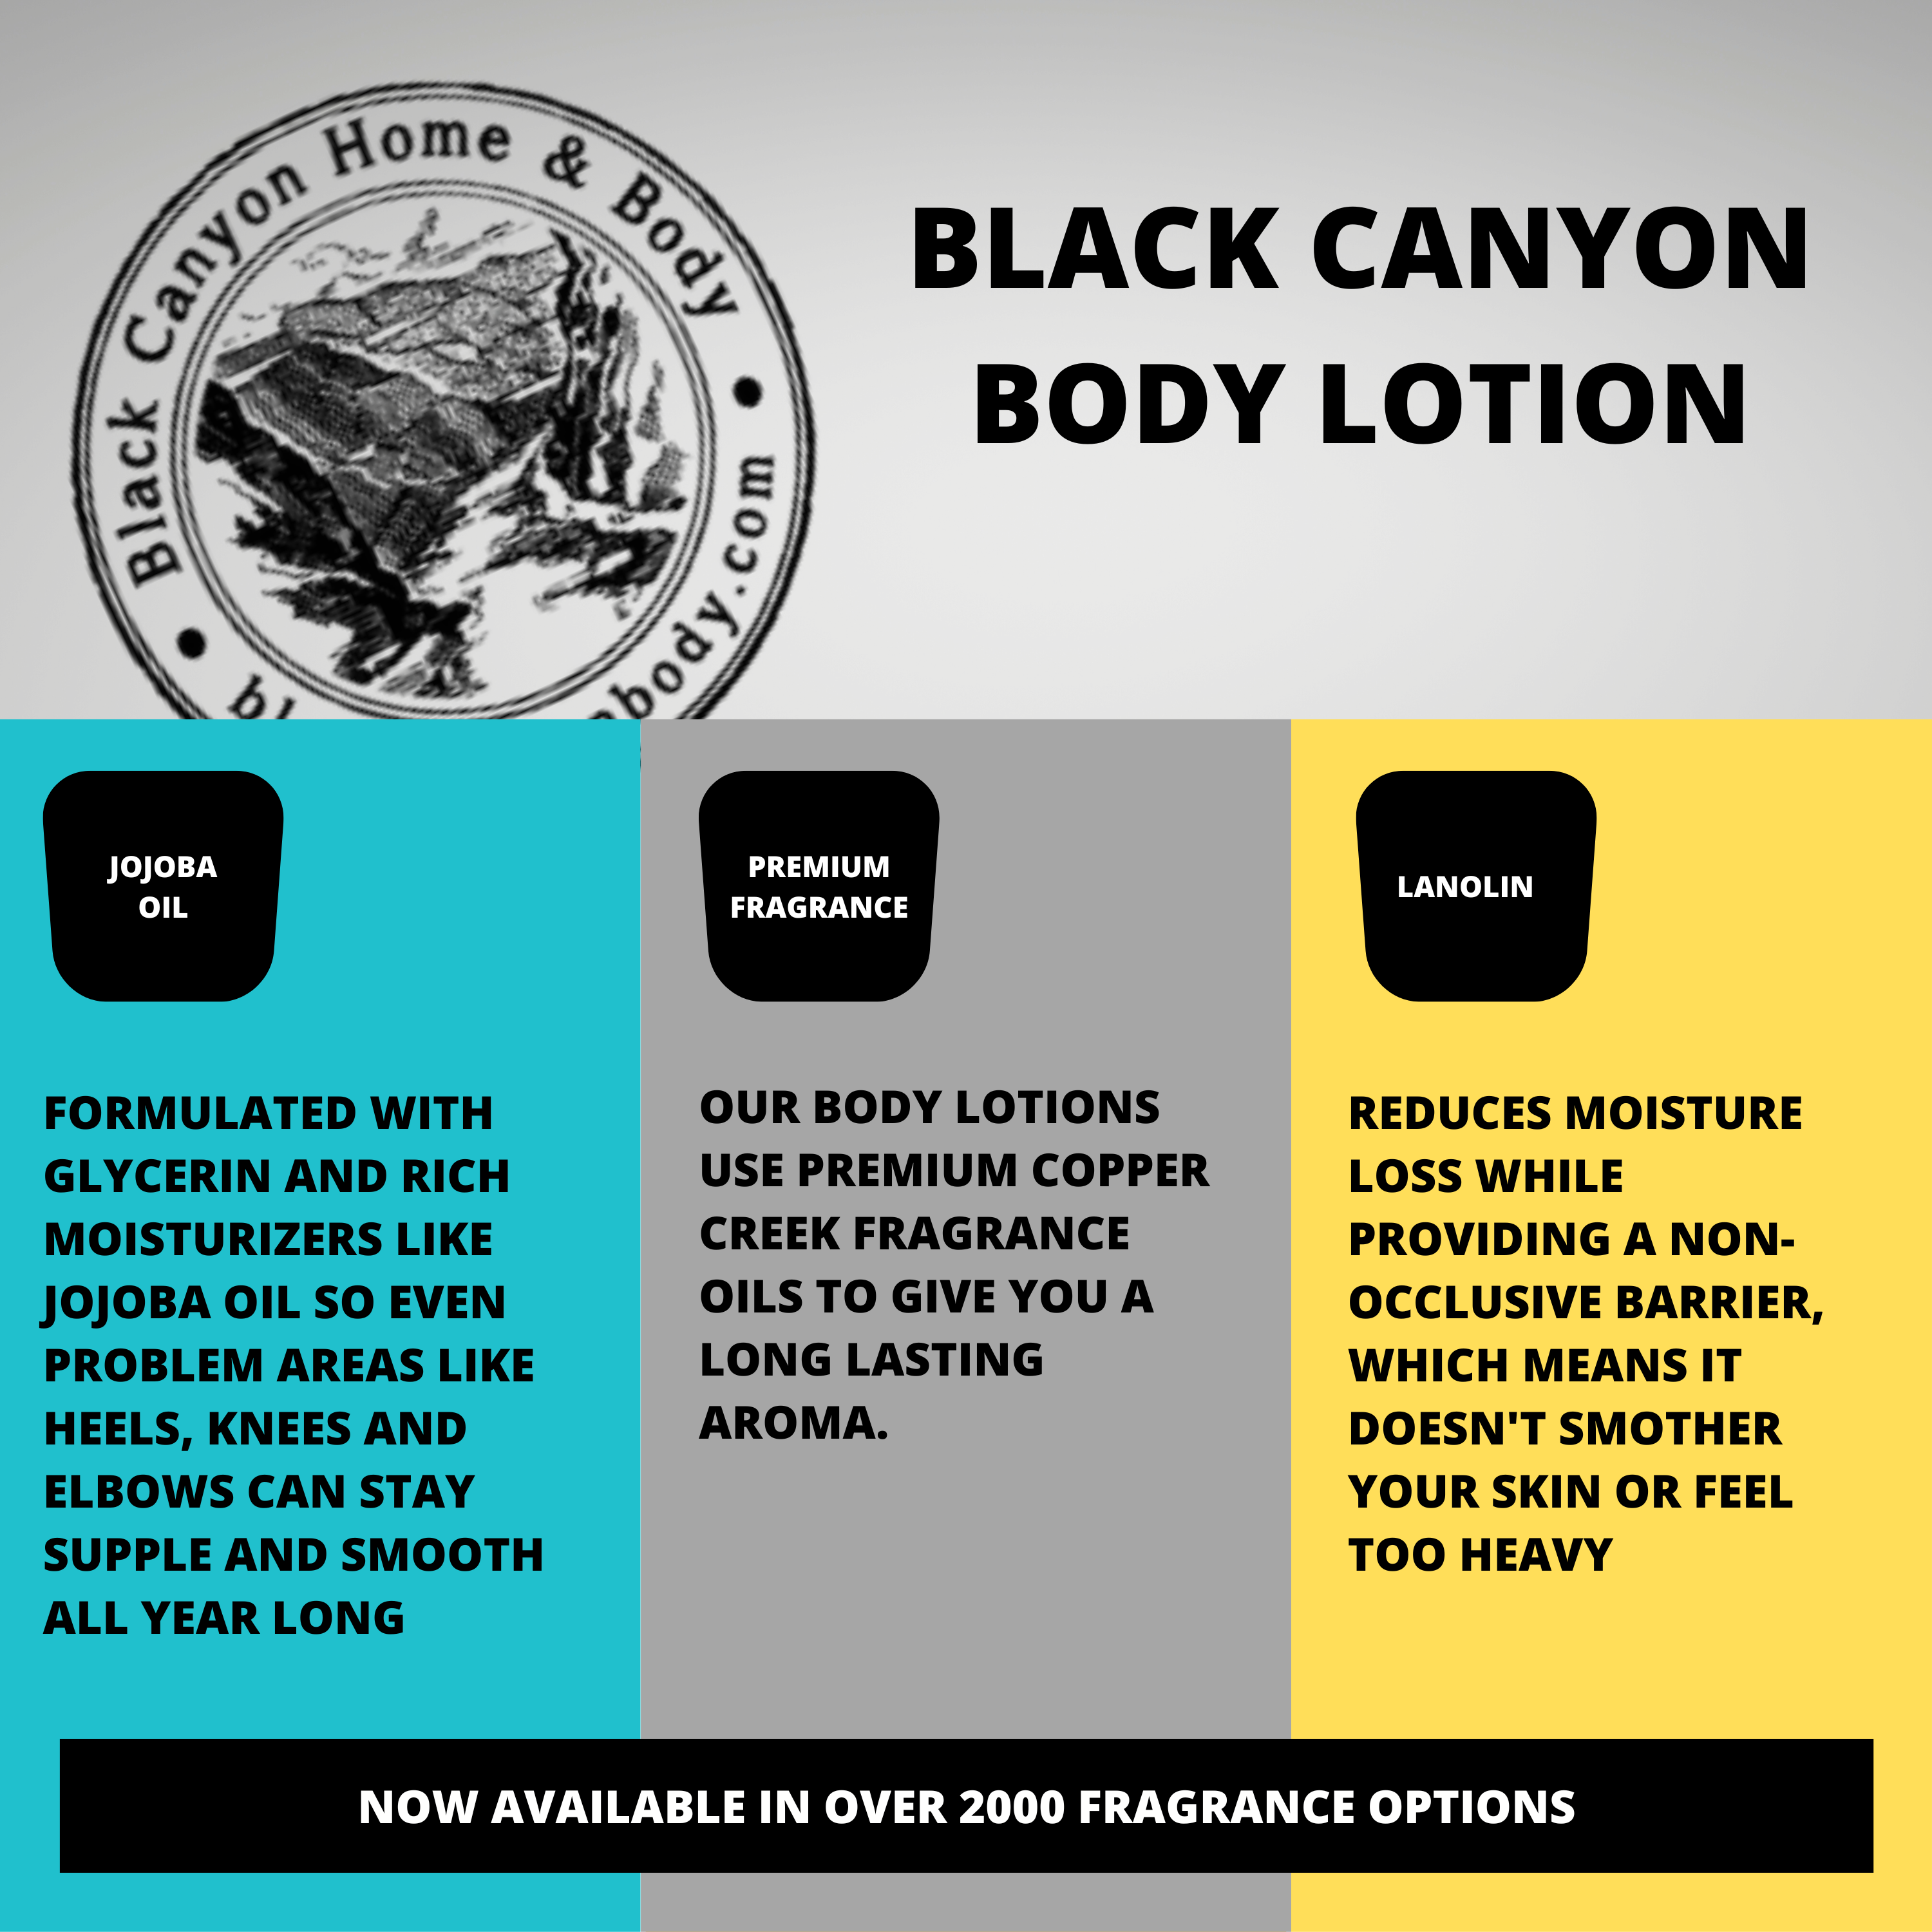 Black Canyon Black Apple Orchard Scented Luxury Body Lotion with Lanolin and Jojoba Oil